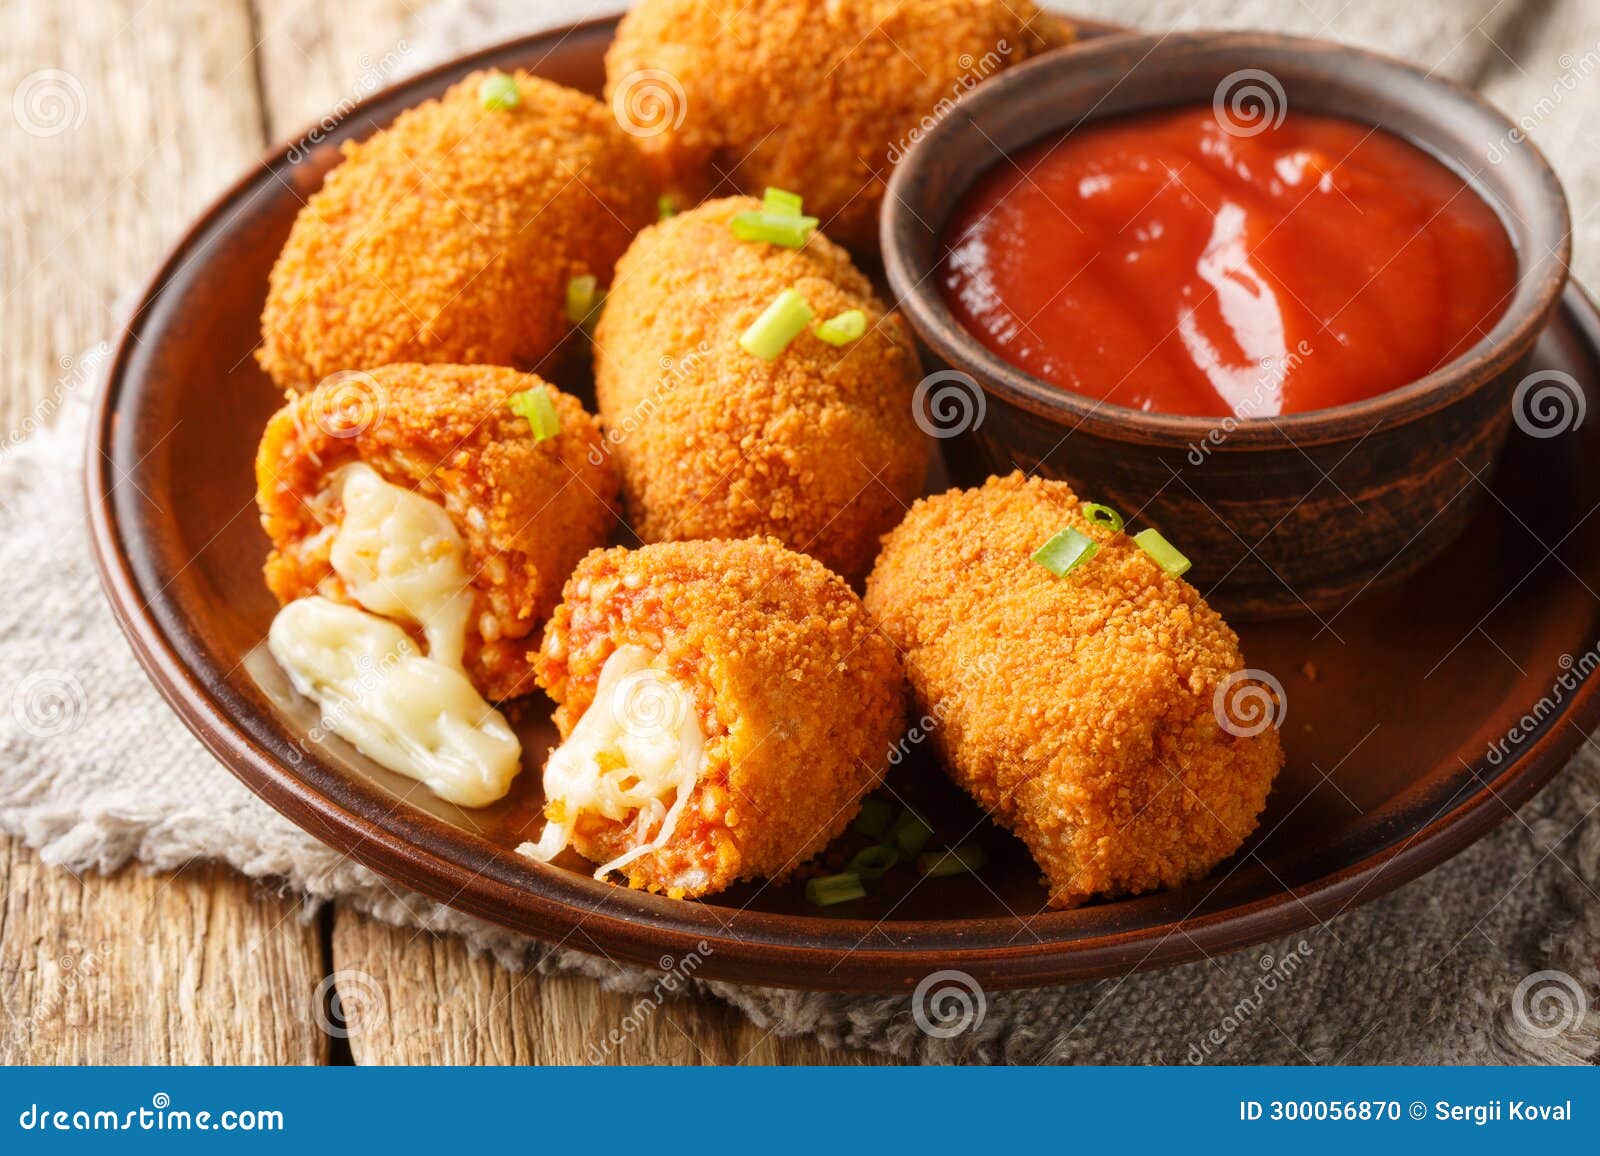 suppli al telefono italian snacks consisting of rice with tomato sauce filled with mozzarella, soaked in eggs, coated with bread